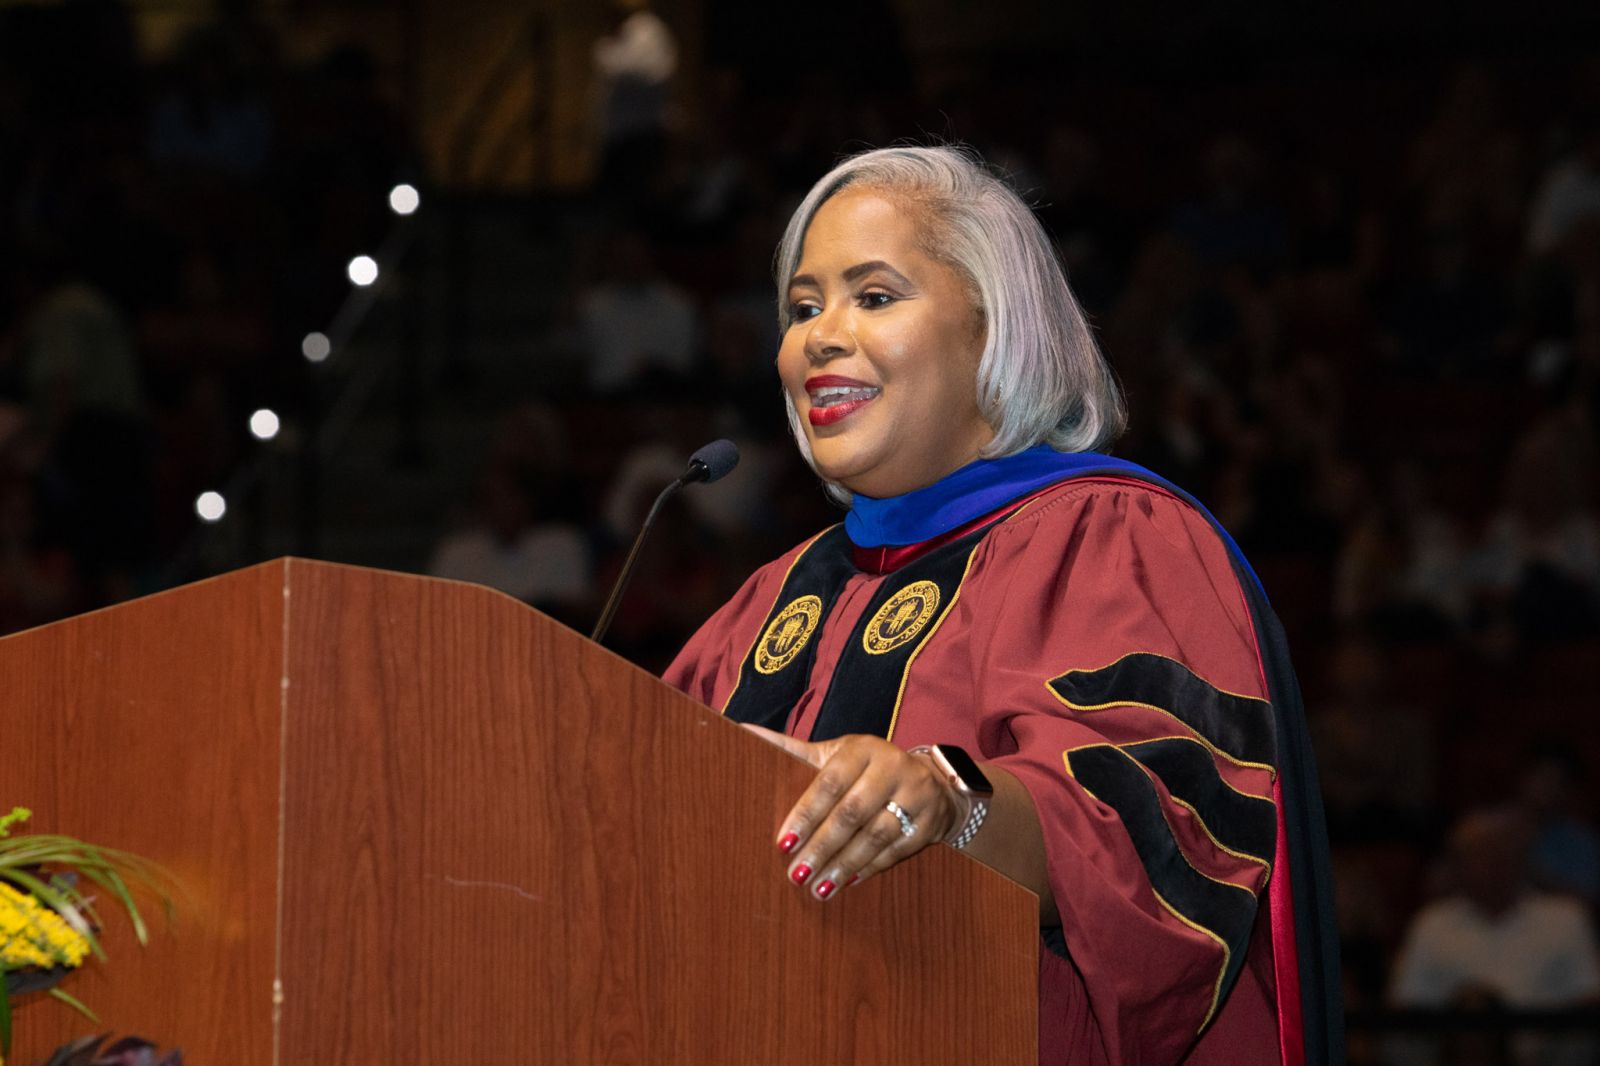 Dr. Andrea K. Friall addressed graduates of the College of Arts and Sciences during FSU's spring commencement Friday, April 29, 2022. (FSU Photography Services)